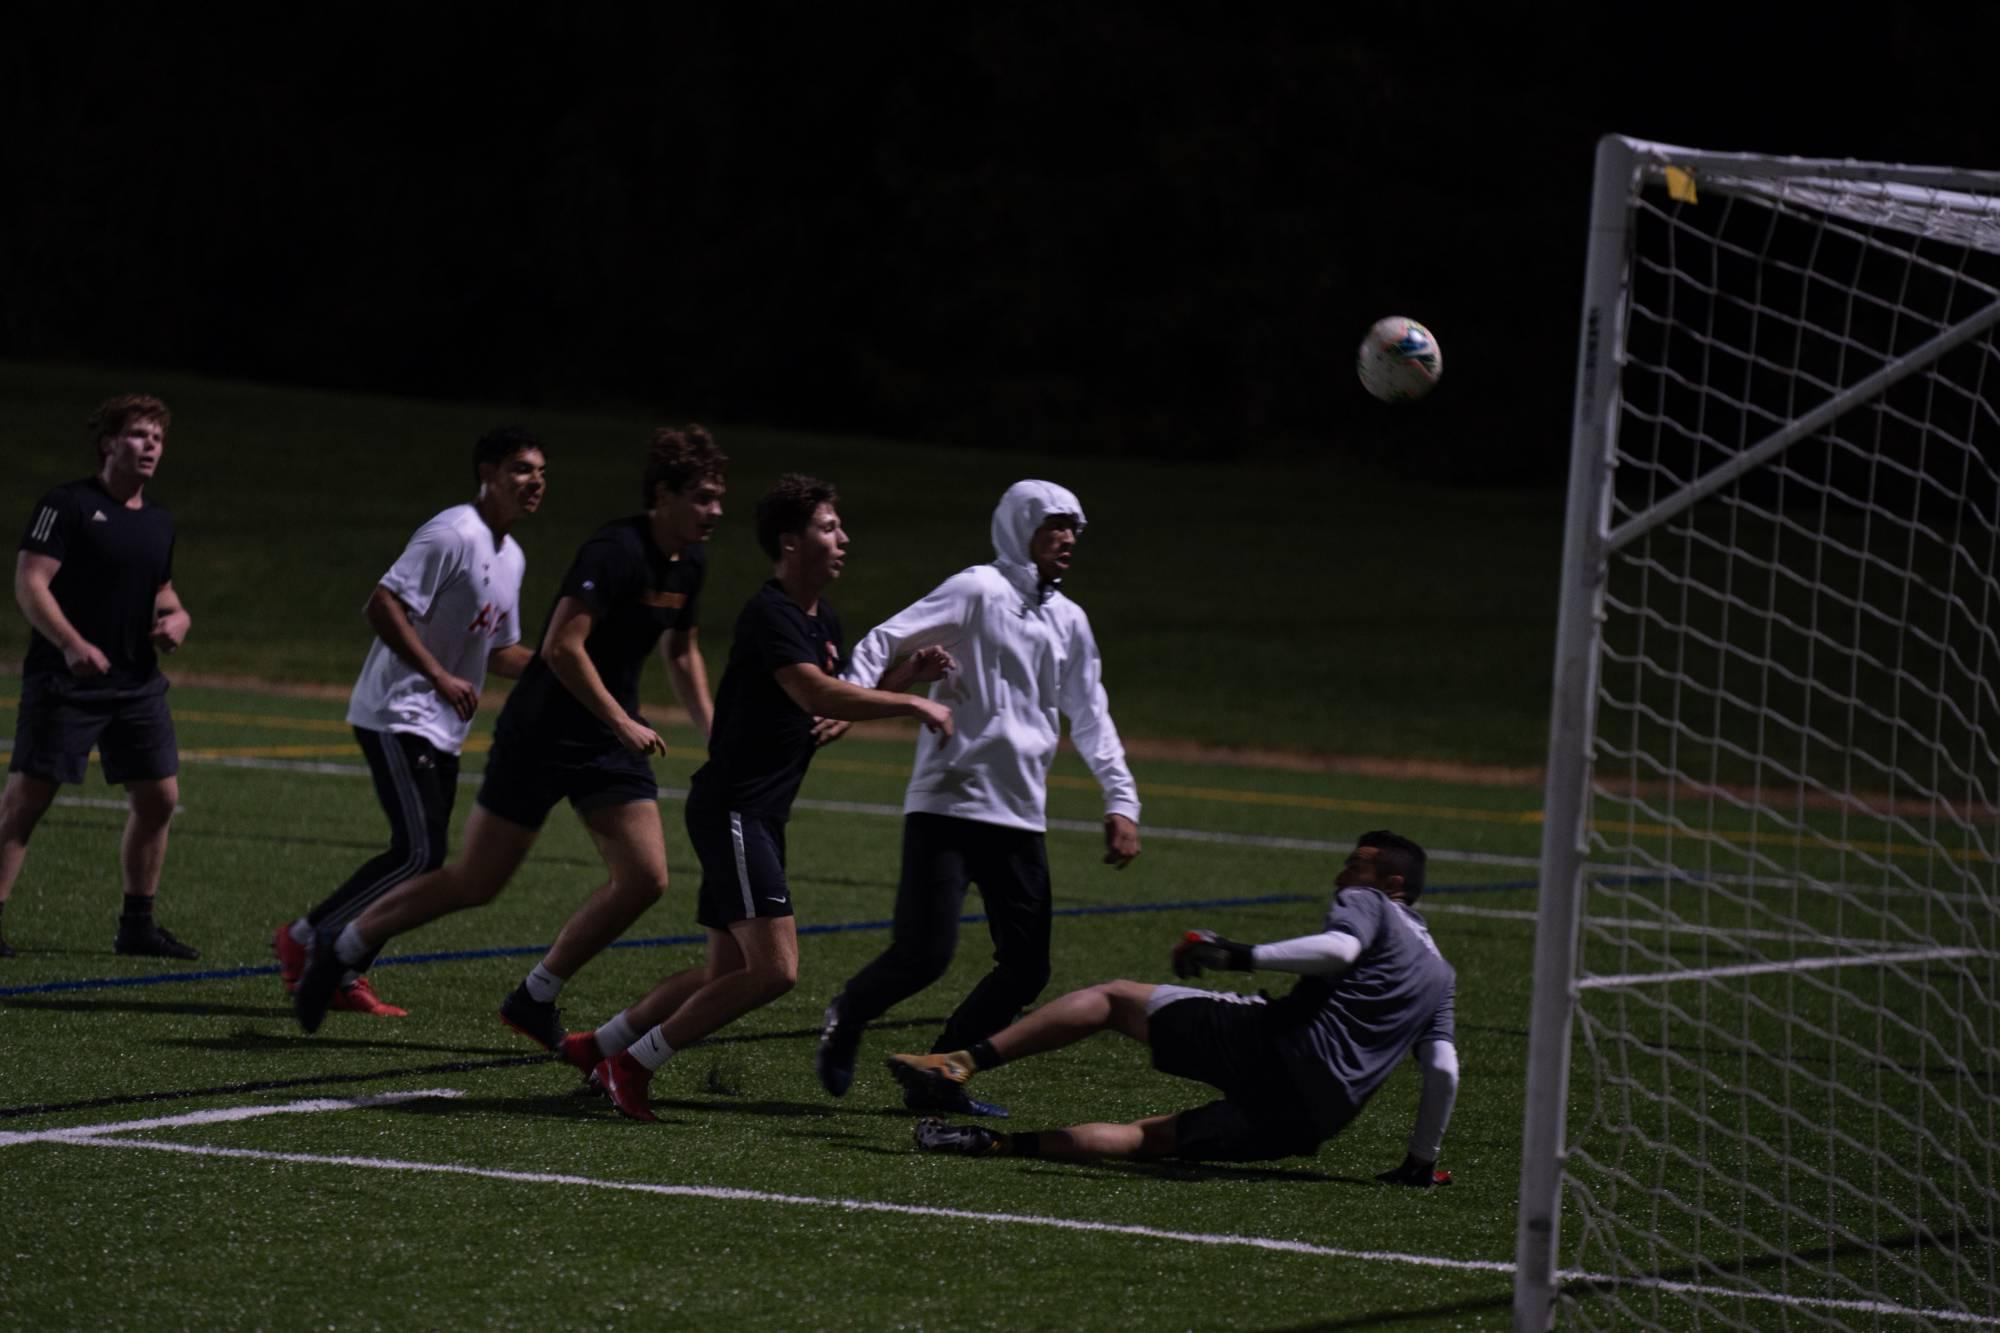 soccer players attempting to score a goal.